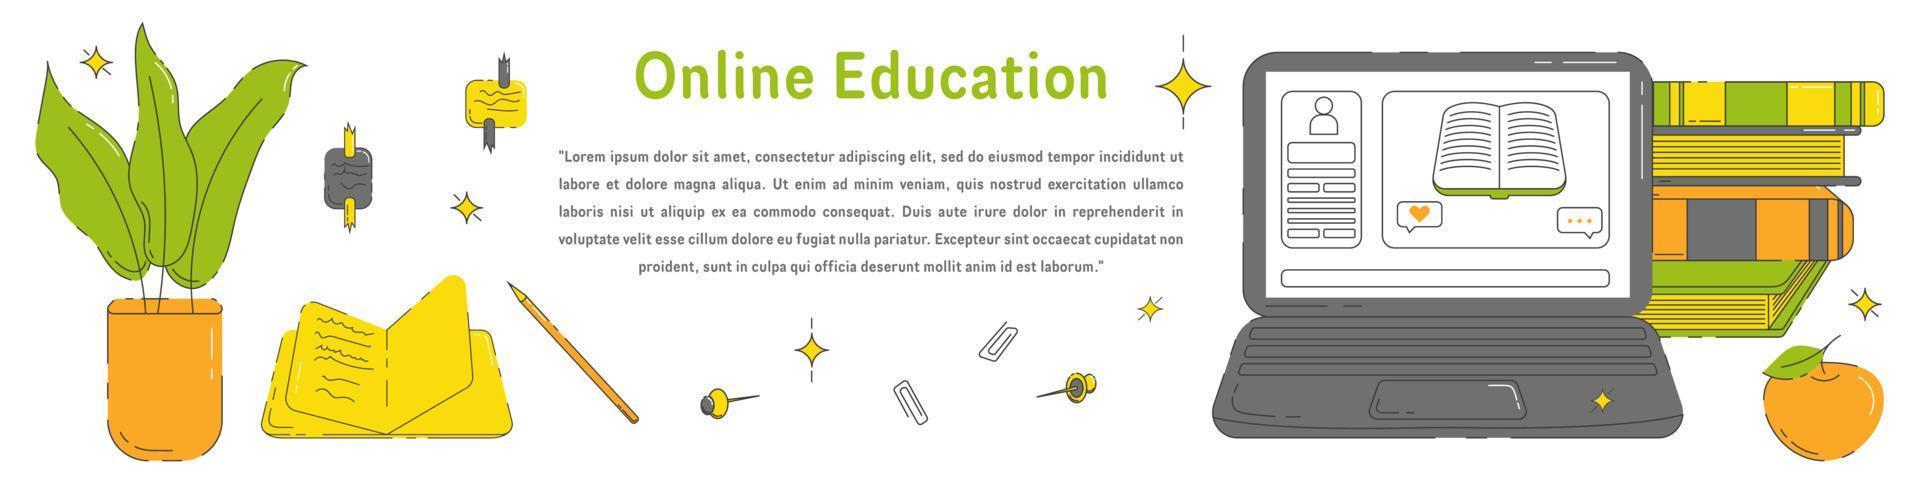 Online Education Vector Banner With Laptop, Books, Note Pad, Home Plant, Apple and Other Objects. Perfect for Websites, Social Media, Printed Materials, etc.